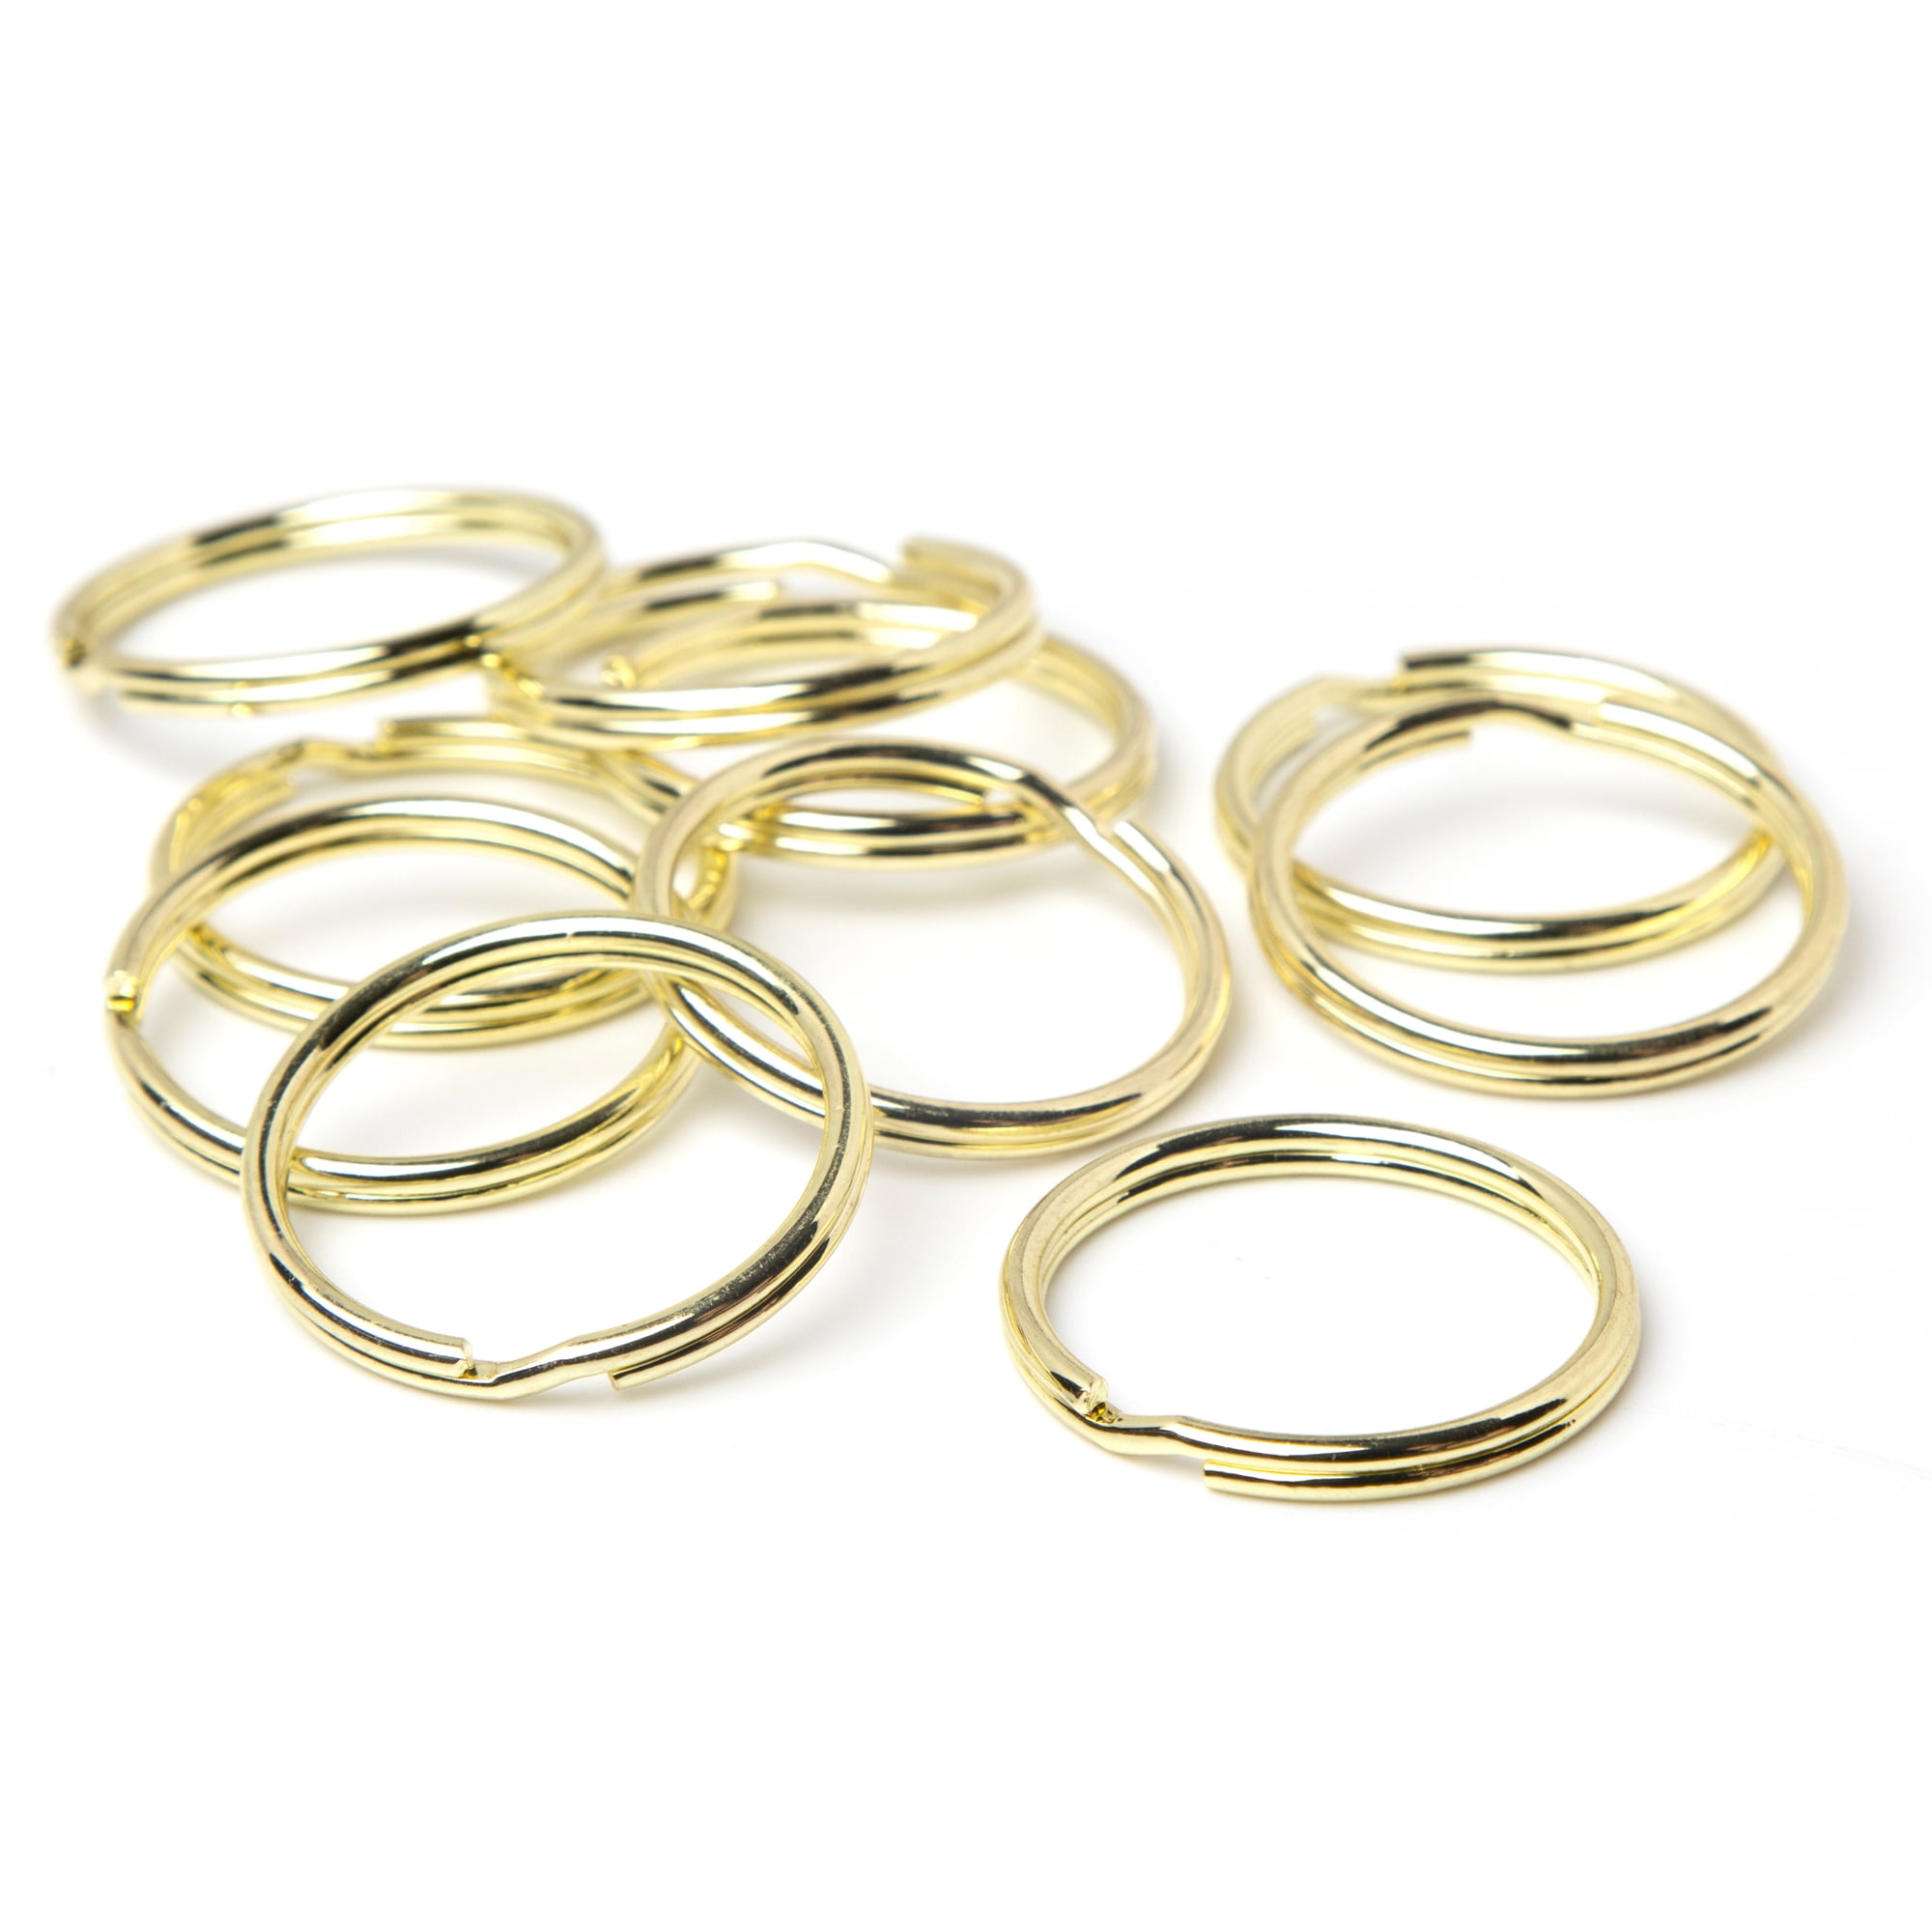 35mm Round Split Rings For Key Rings Bags Purses Gold Plated 10 50 100